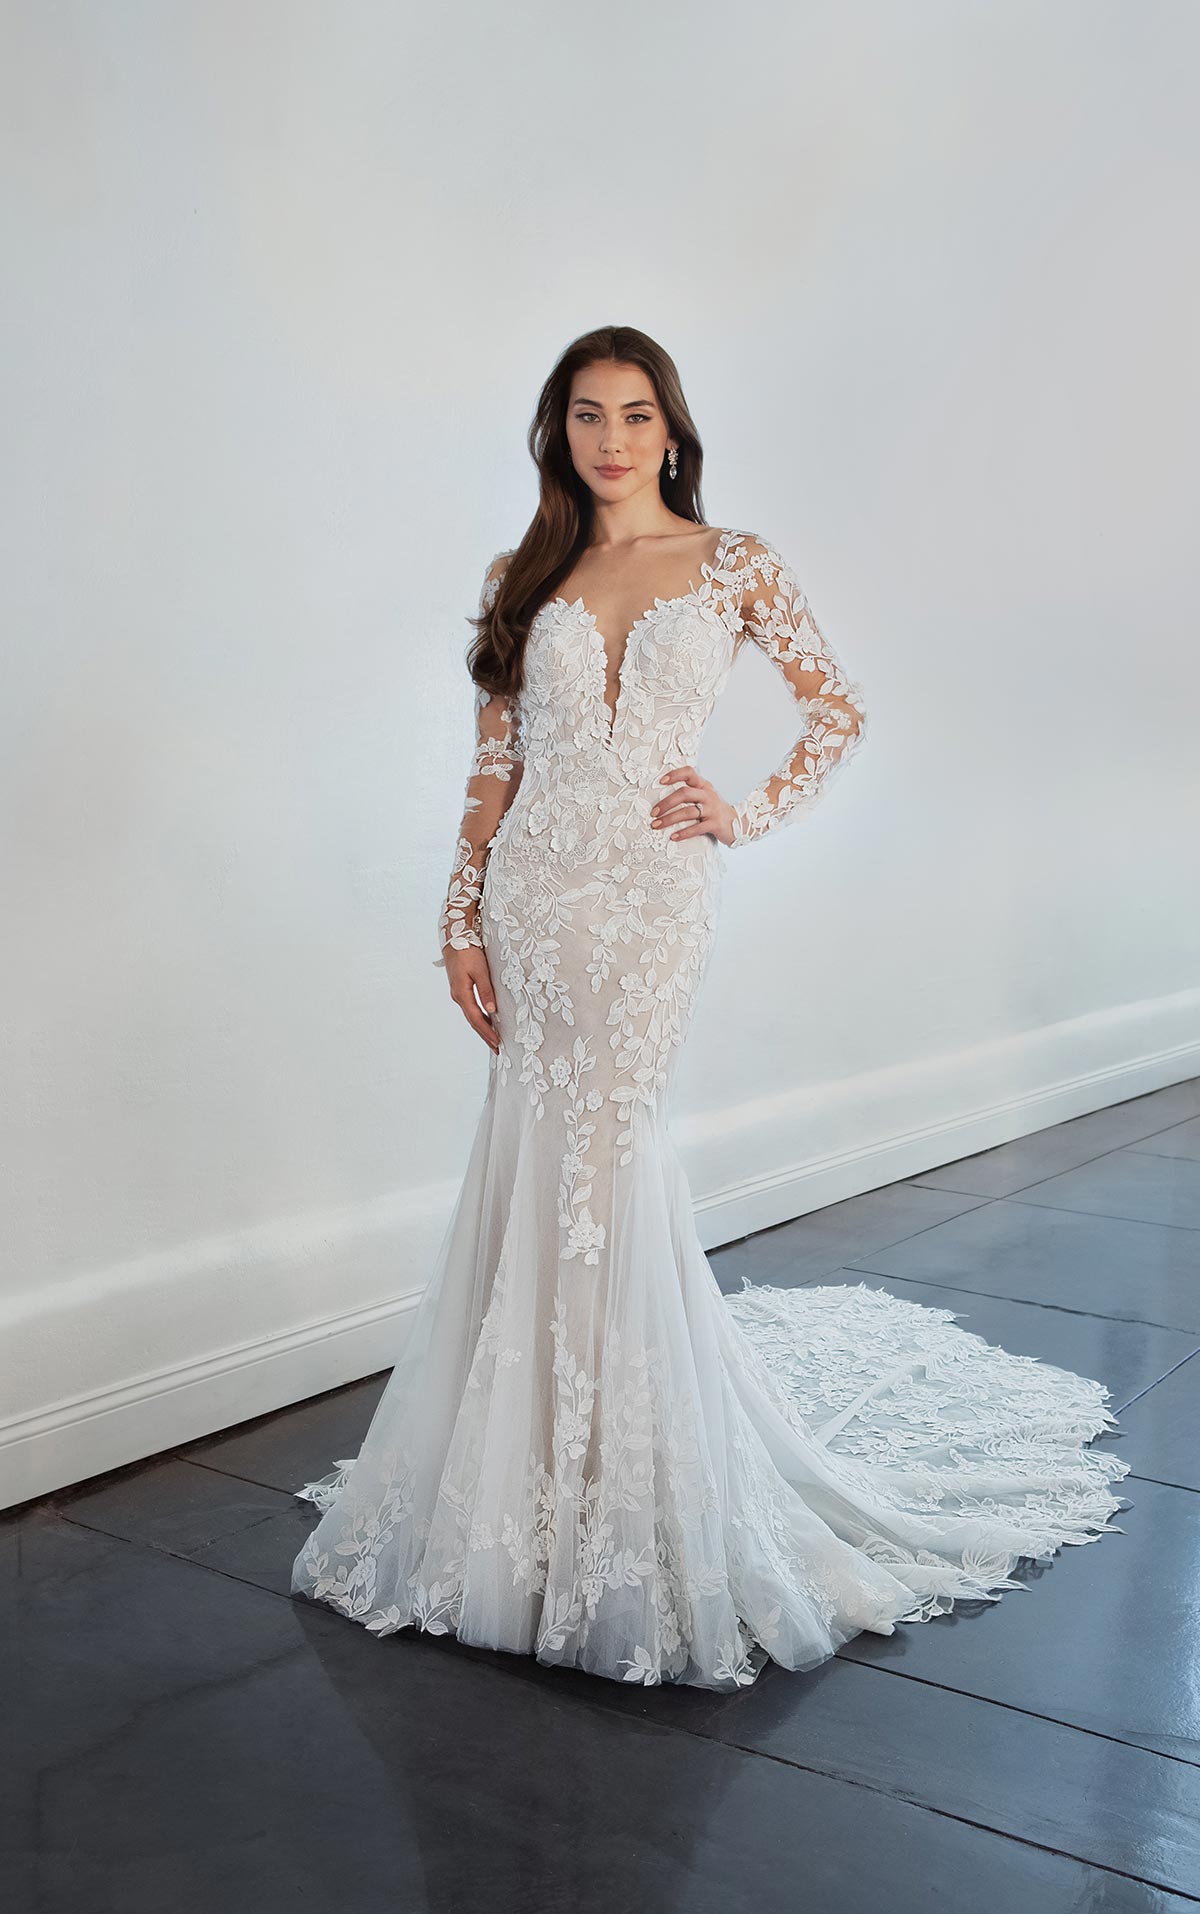 The Graceful Mist: 4 Classically Beautiful Wedding Dresses to Pass On